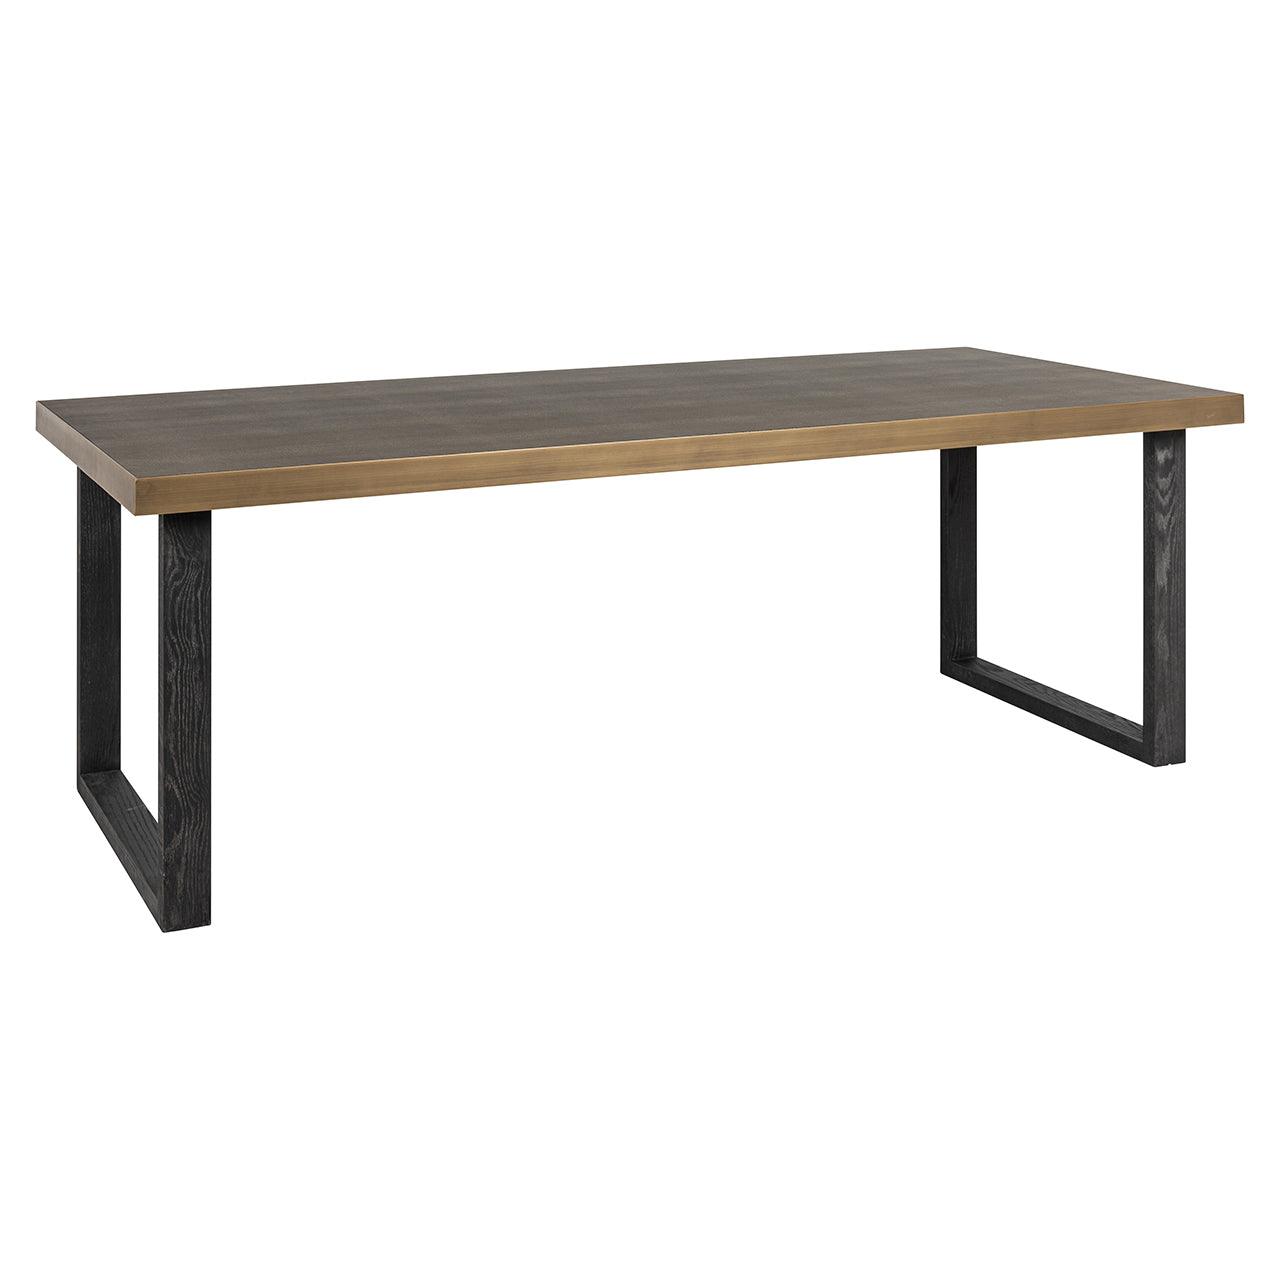 Bloomingville Shagreen Dining Table with Black Oak Wood Base by Richmond Interiors - Maison Rêves UK